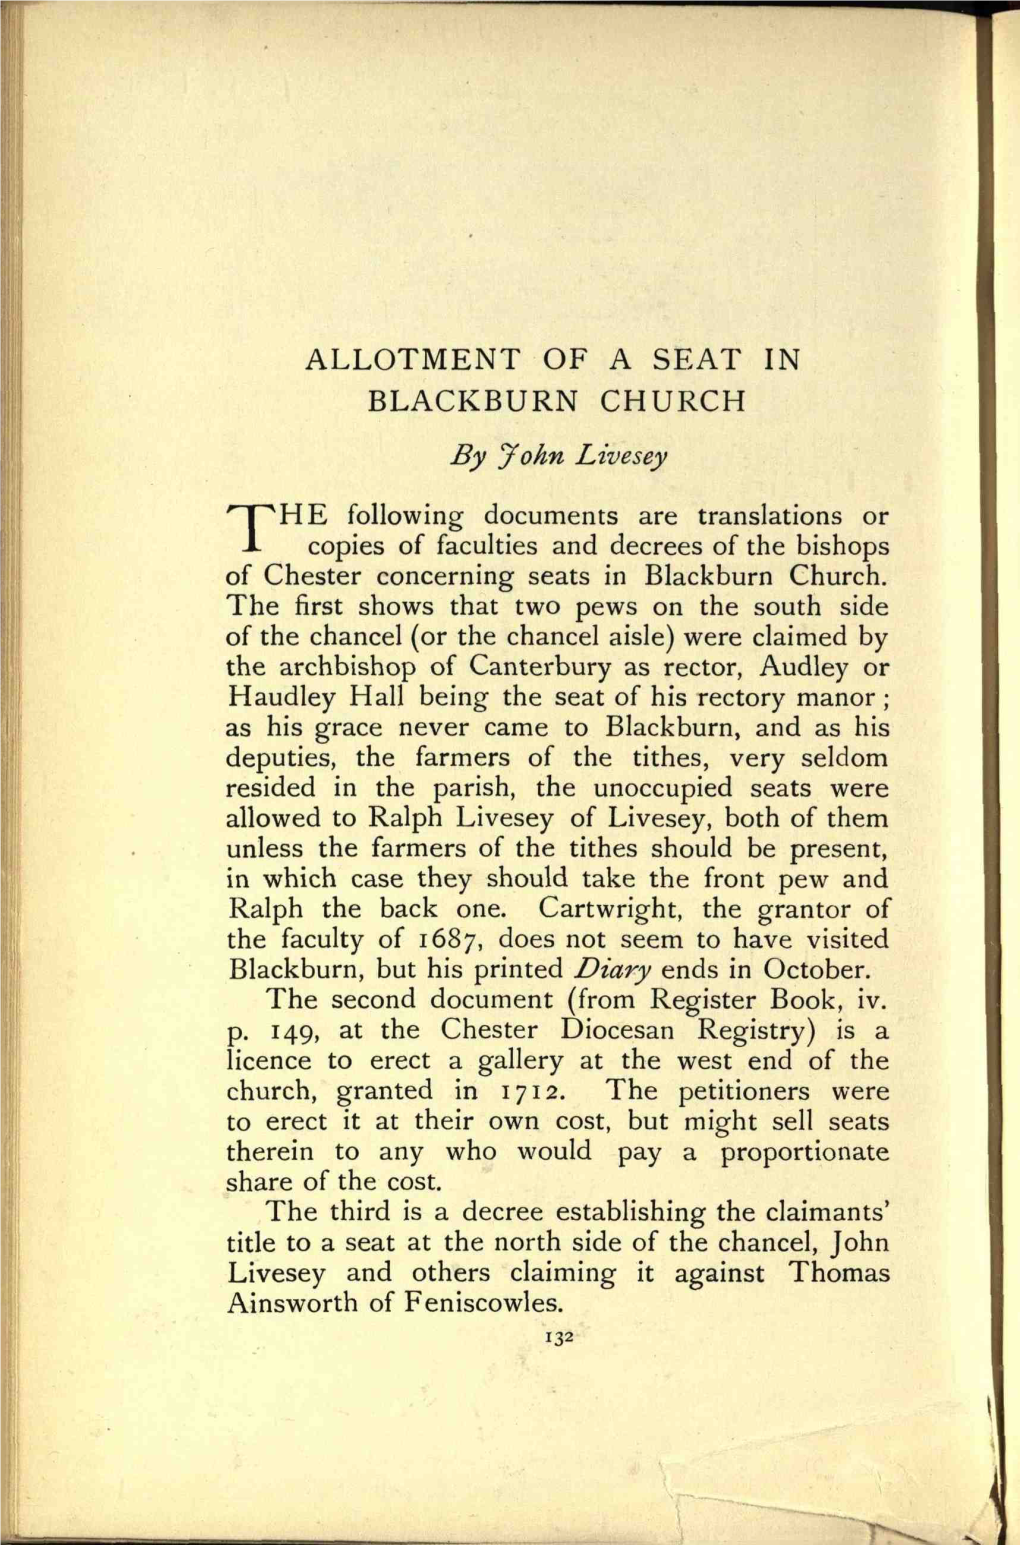 ALLOTMENT of a SEAT in BLACKBURN CHURCH by John Livesey